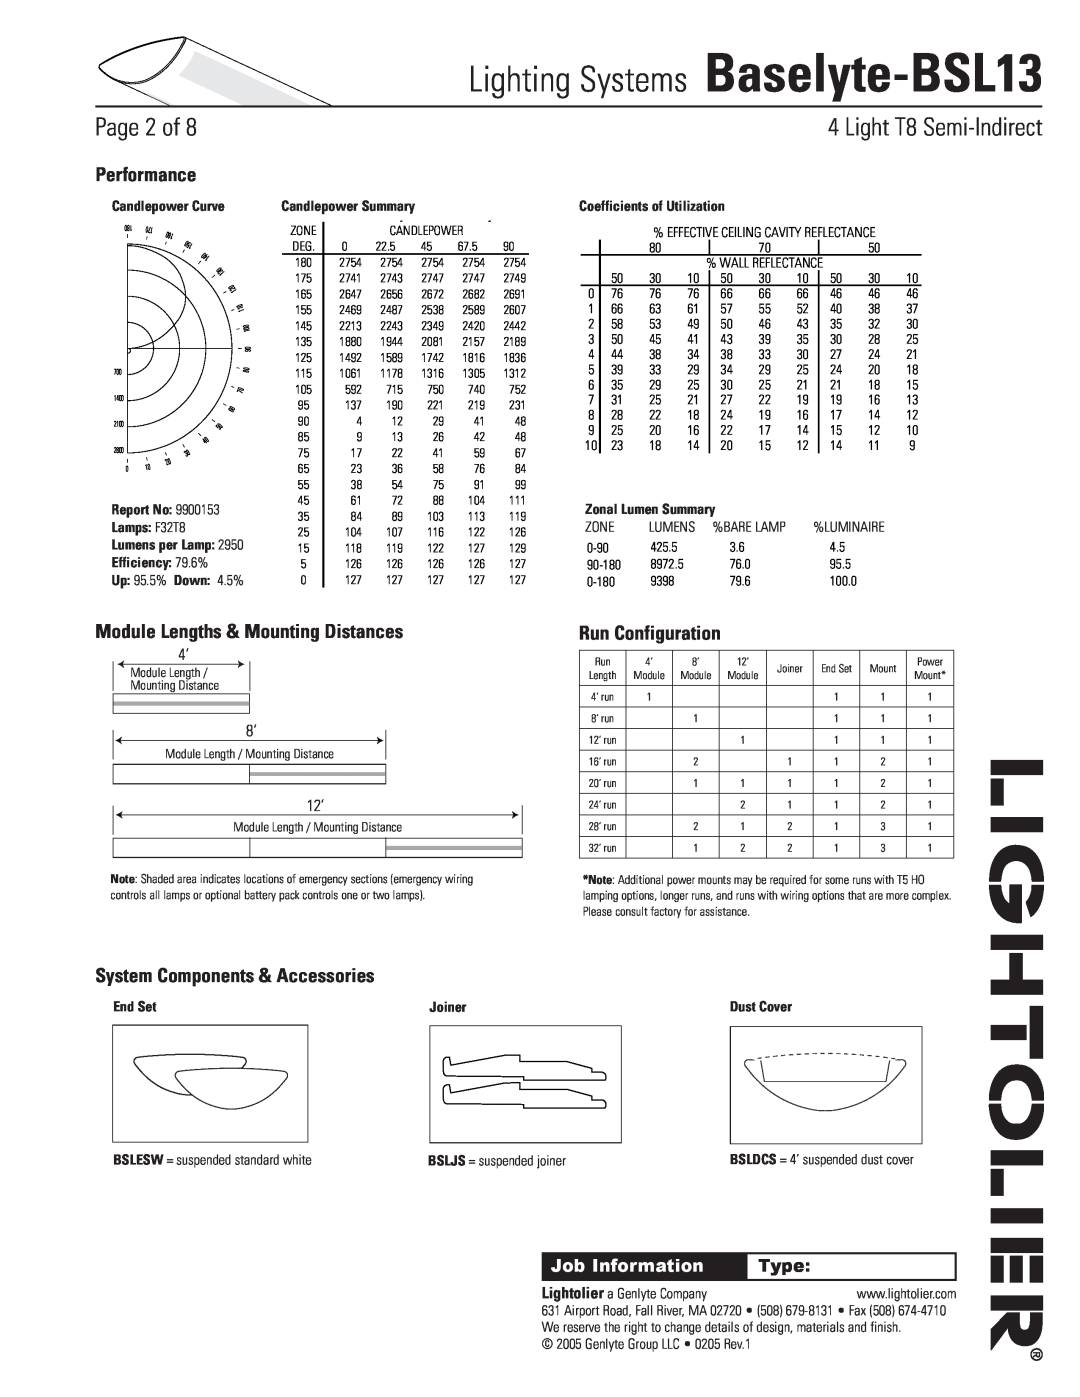 Lightolier Lighting Systems Baselyte-BSL13, Performance, Module Lengths & Mounting Distances, Run Configuration, Type 